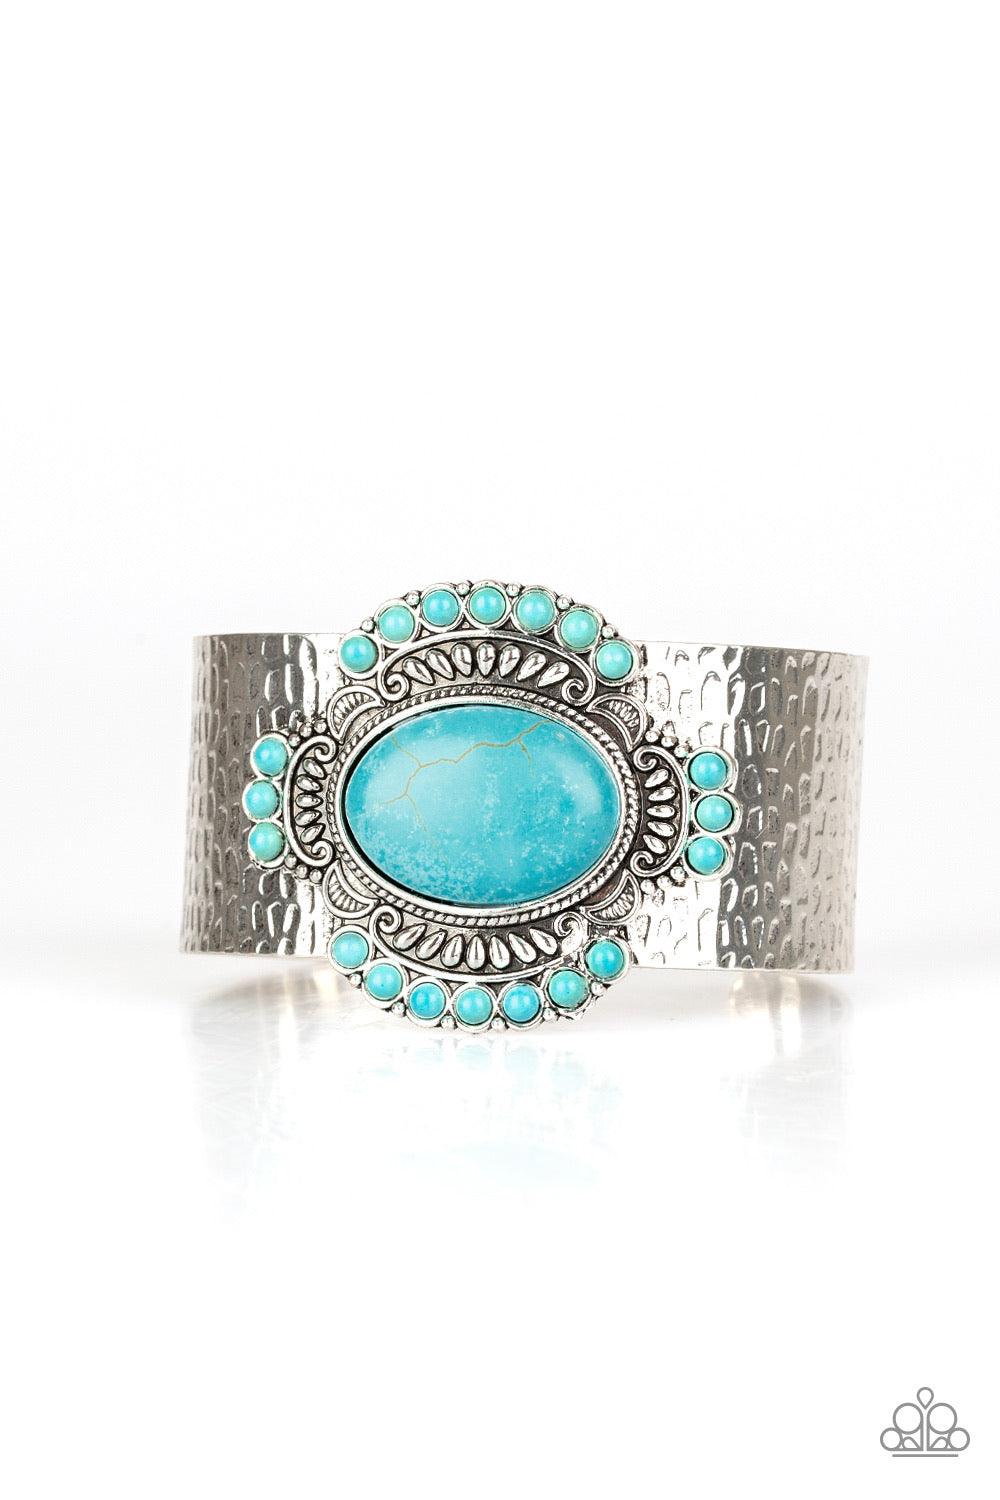 Paparazzi Accessories Canyon Crafted ~Blue Radiating with refreshing turquoise stones and tribal inspired patterns, an ornate stone frame is pressed into the center of a hammered silver cuff for an artisan flair.